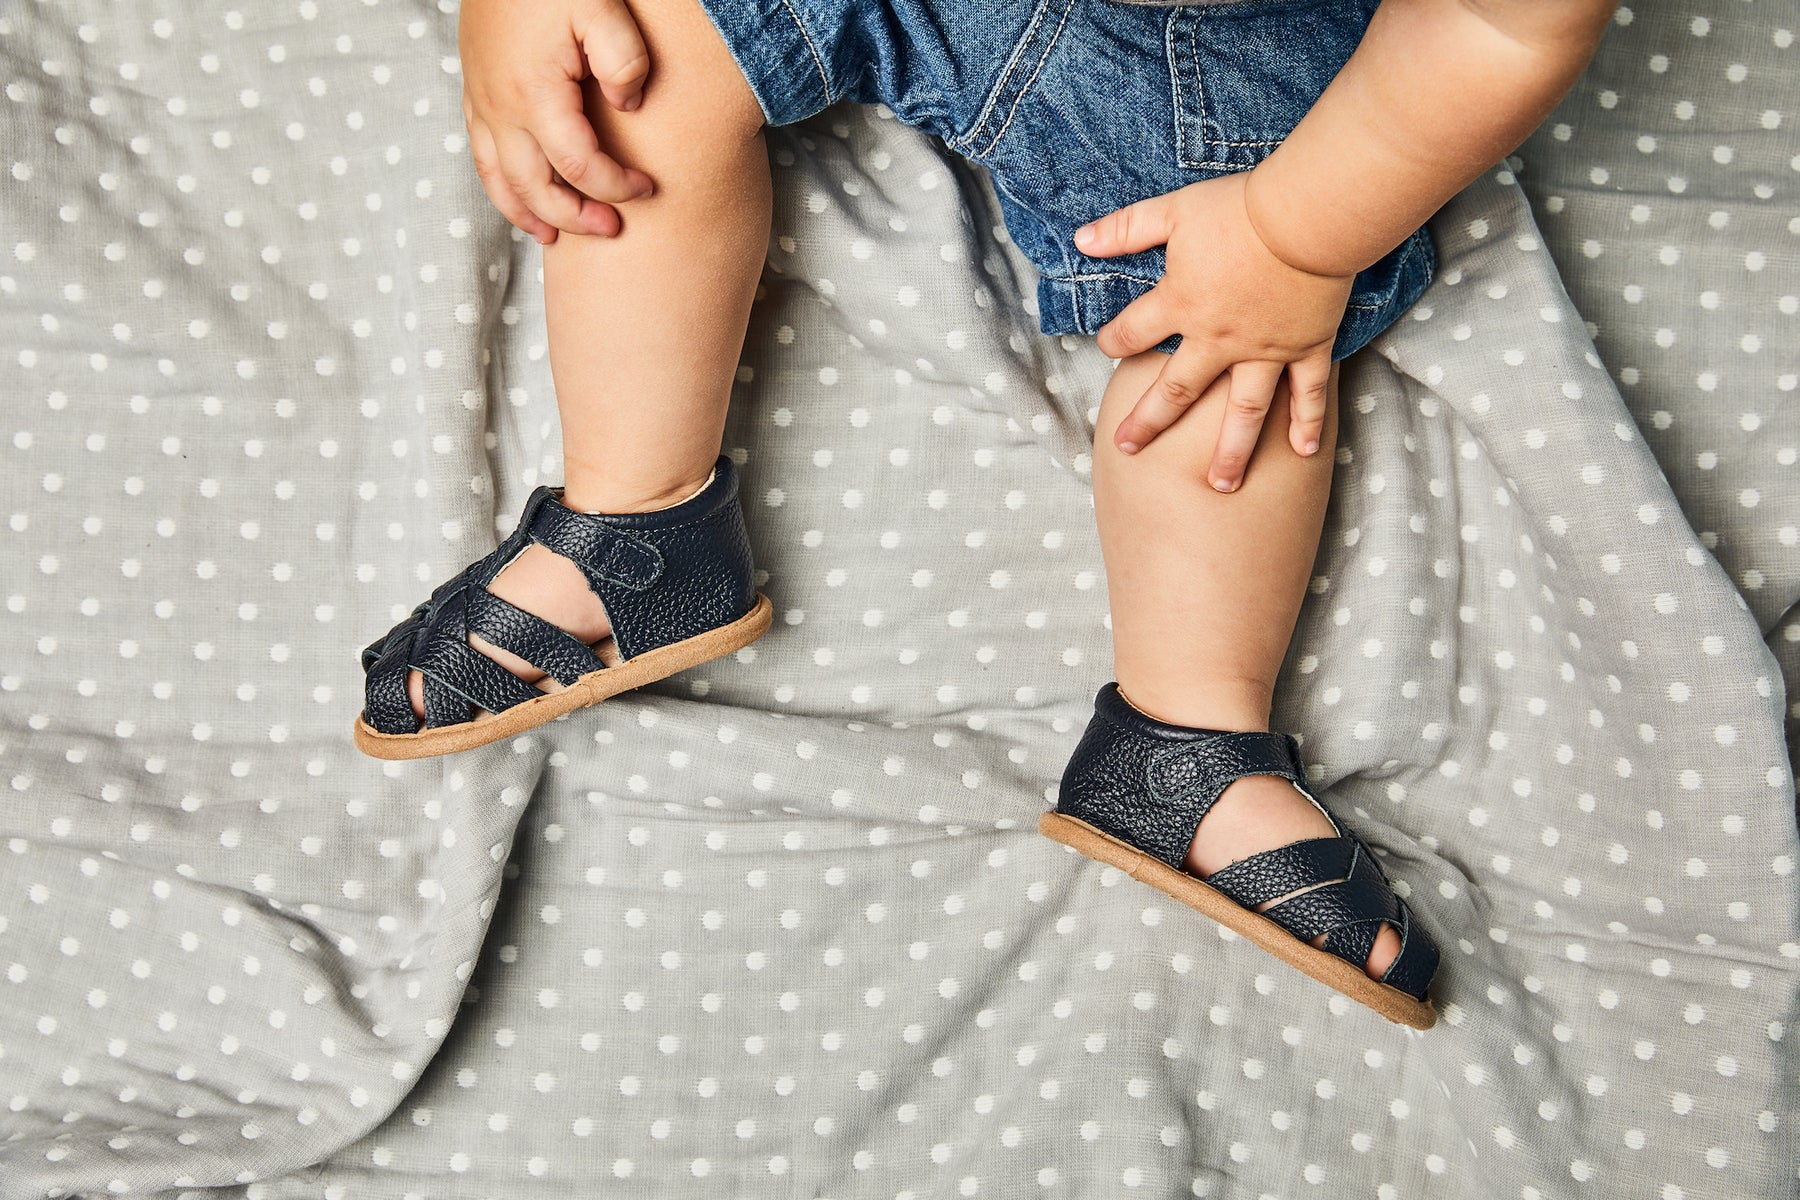 How To Choose The Right Size Shoe for Your Baby